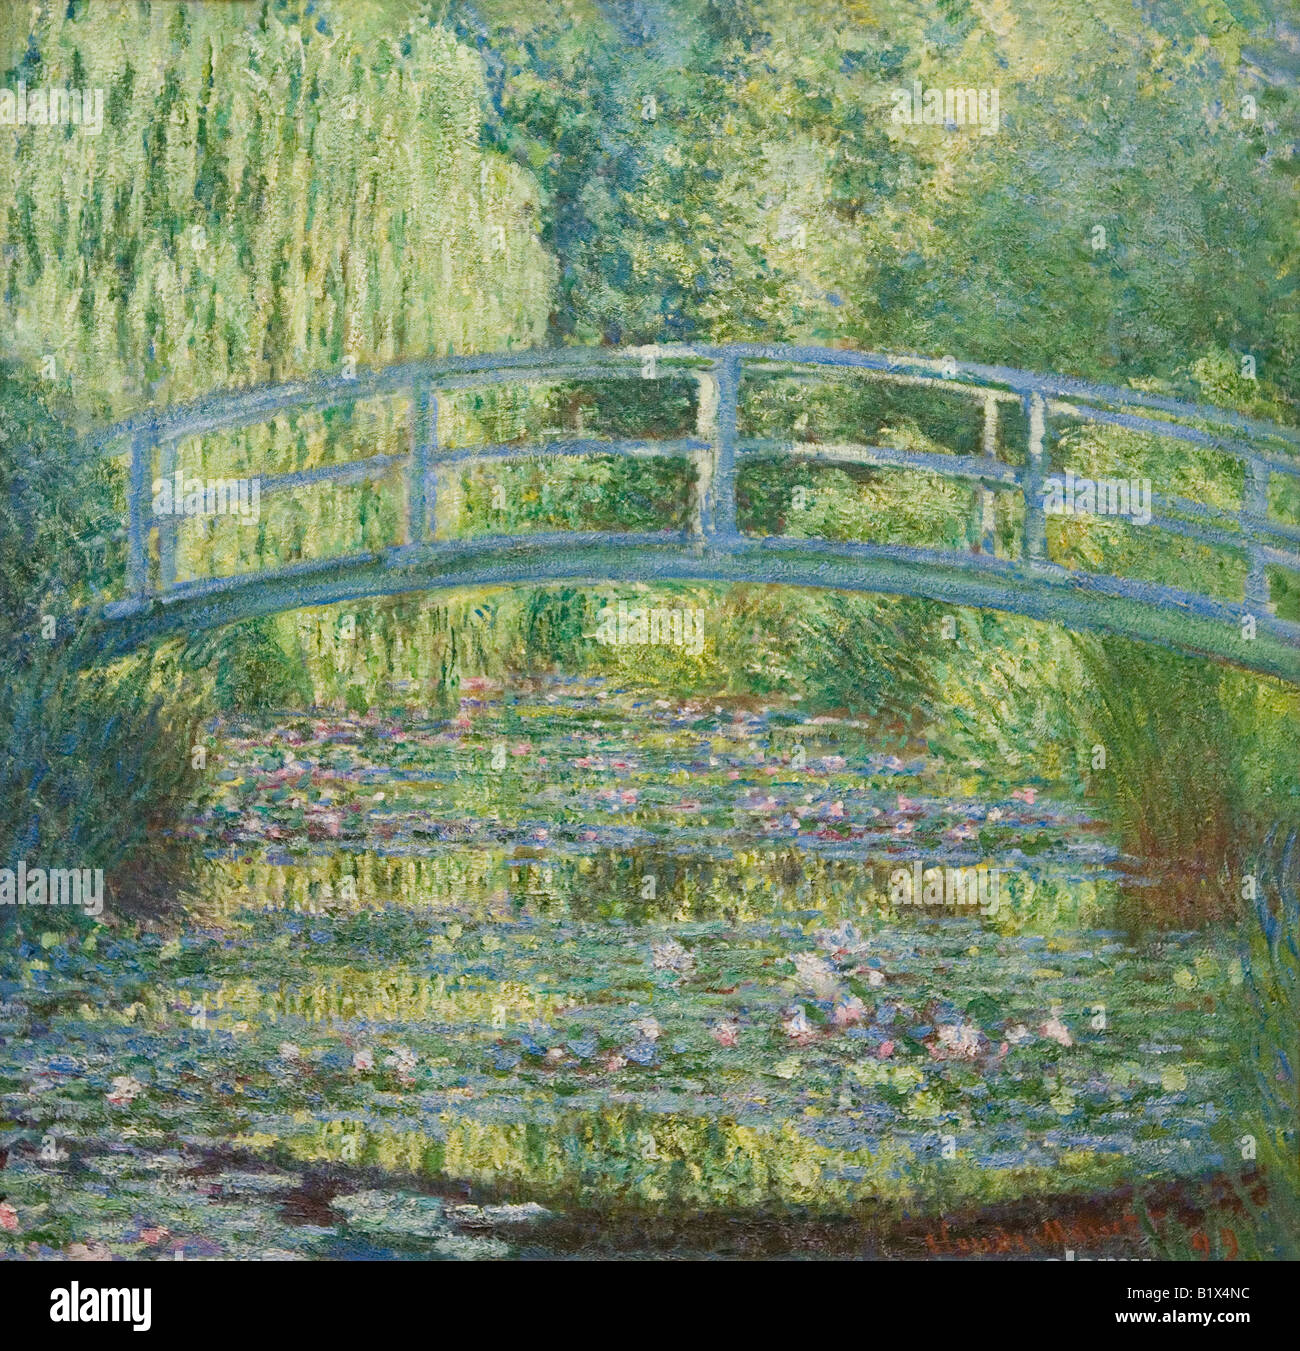 Il Water-Lily Pond, Sinfonia in verde 1899 dipinto da Claude Monet Musee D'Orsay Galleria d'Arte e Museo Paris France Europe Foto Stock